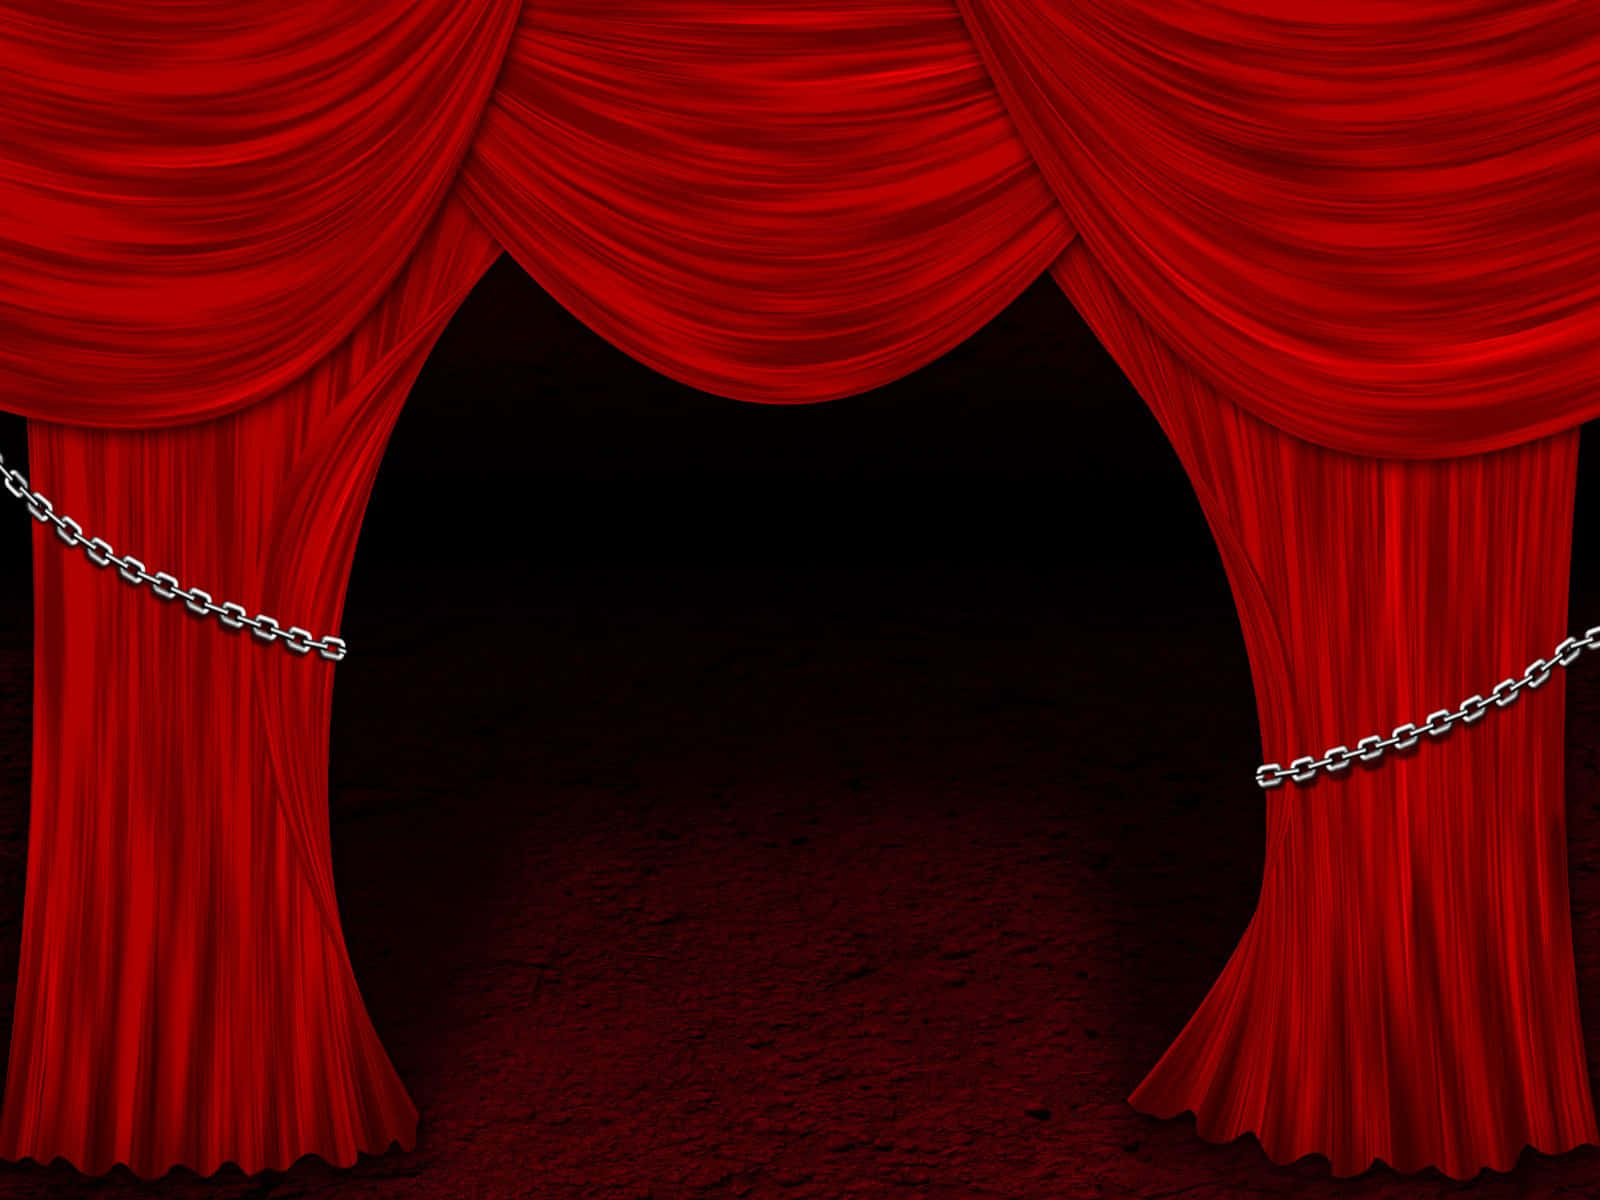 Download Red Curtain With Chains | Wallpapers.com